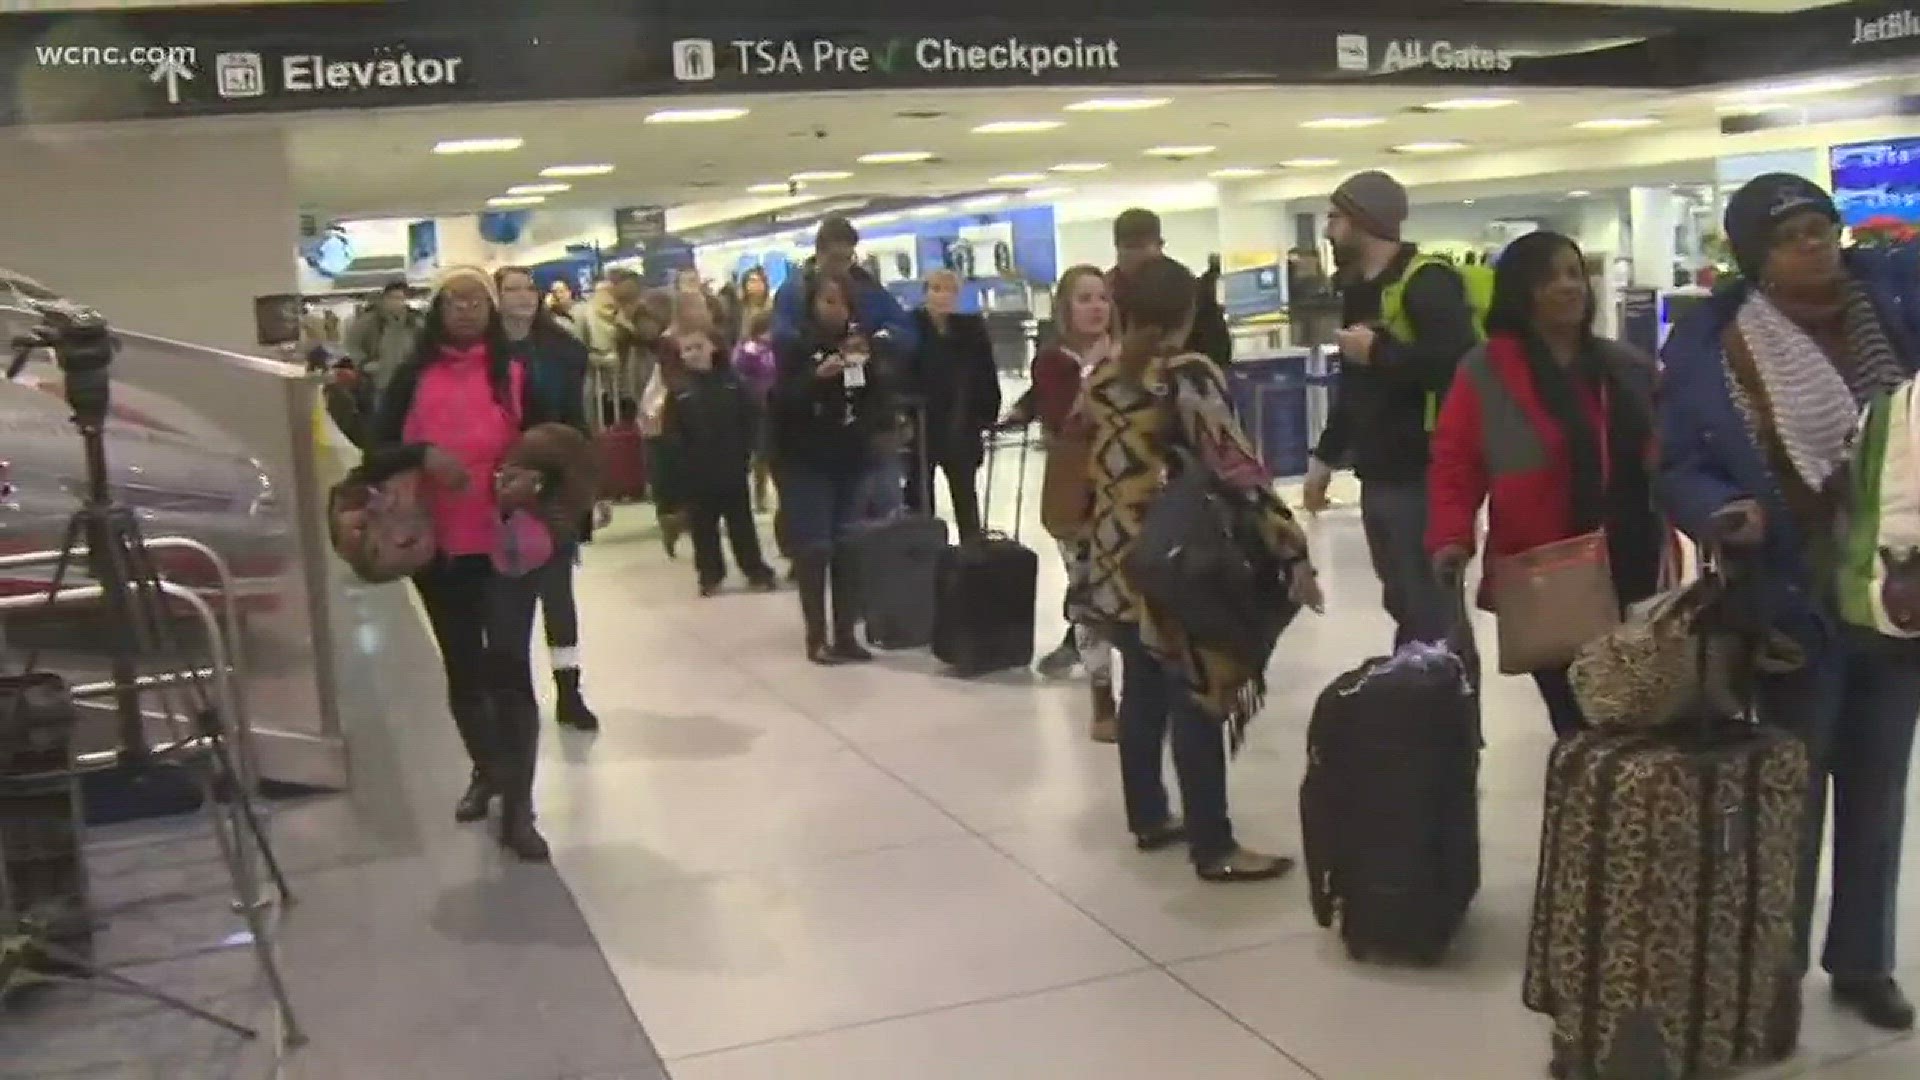 Extra passengers are expected to travel through CLT airport